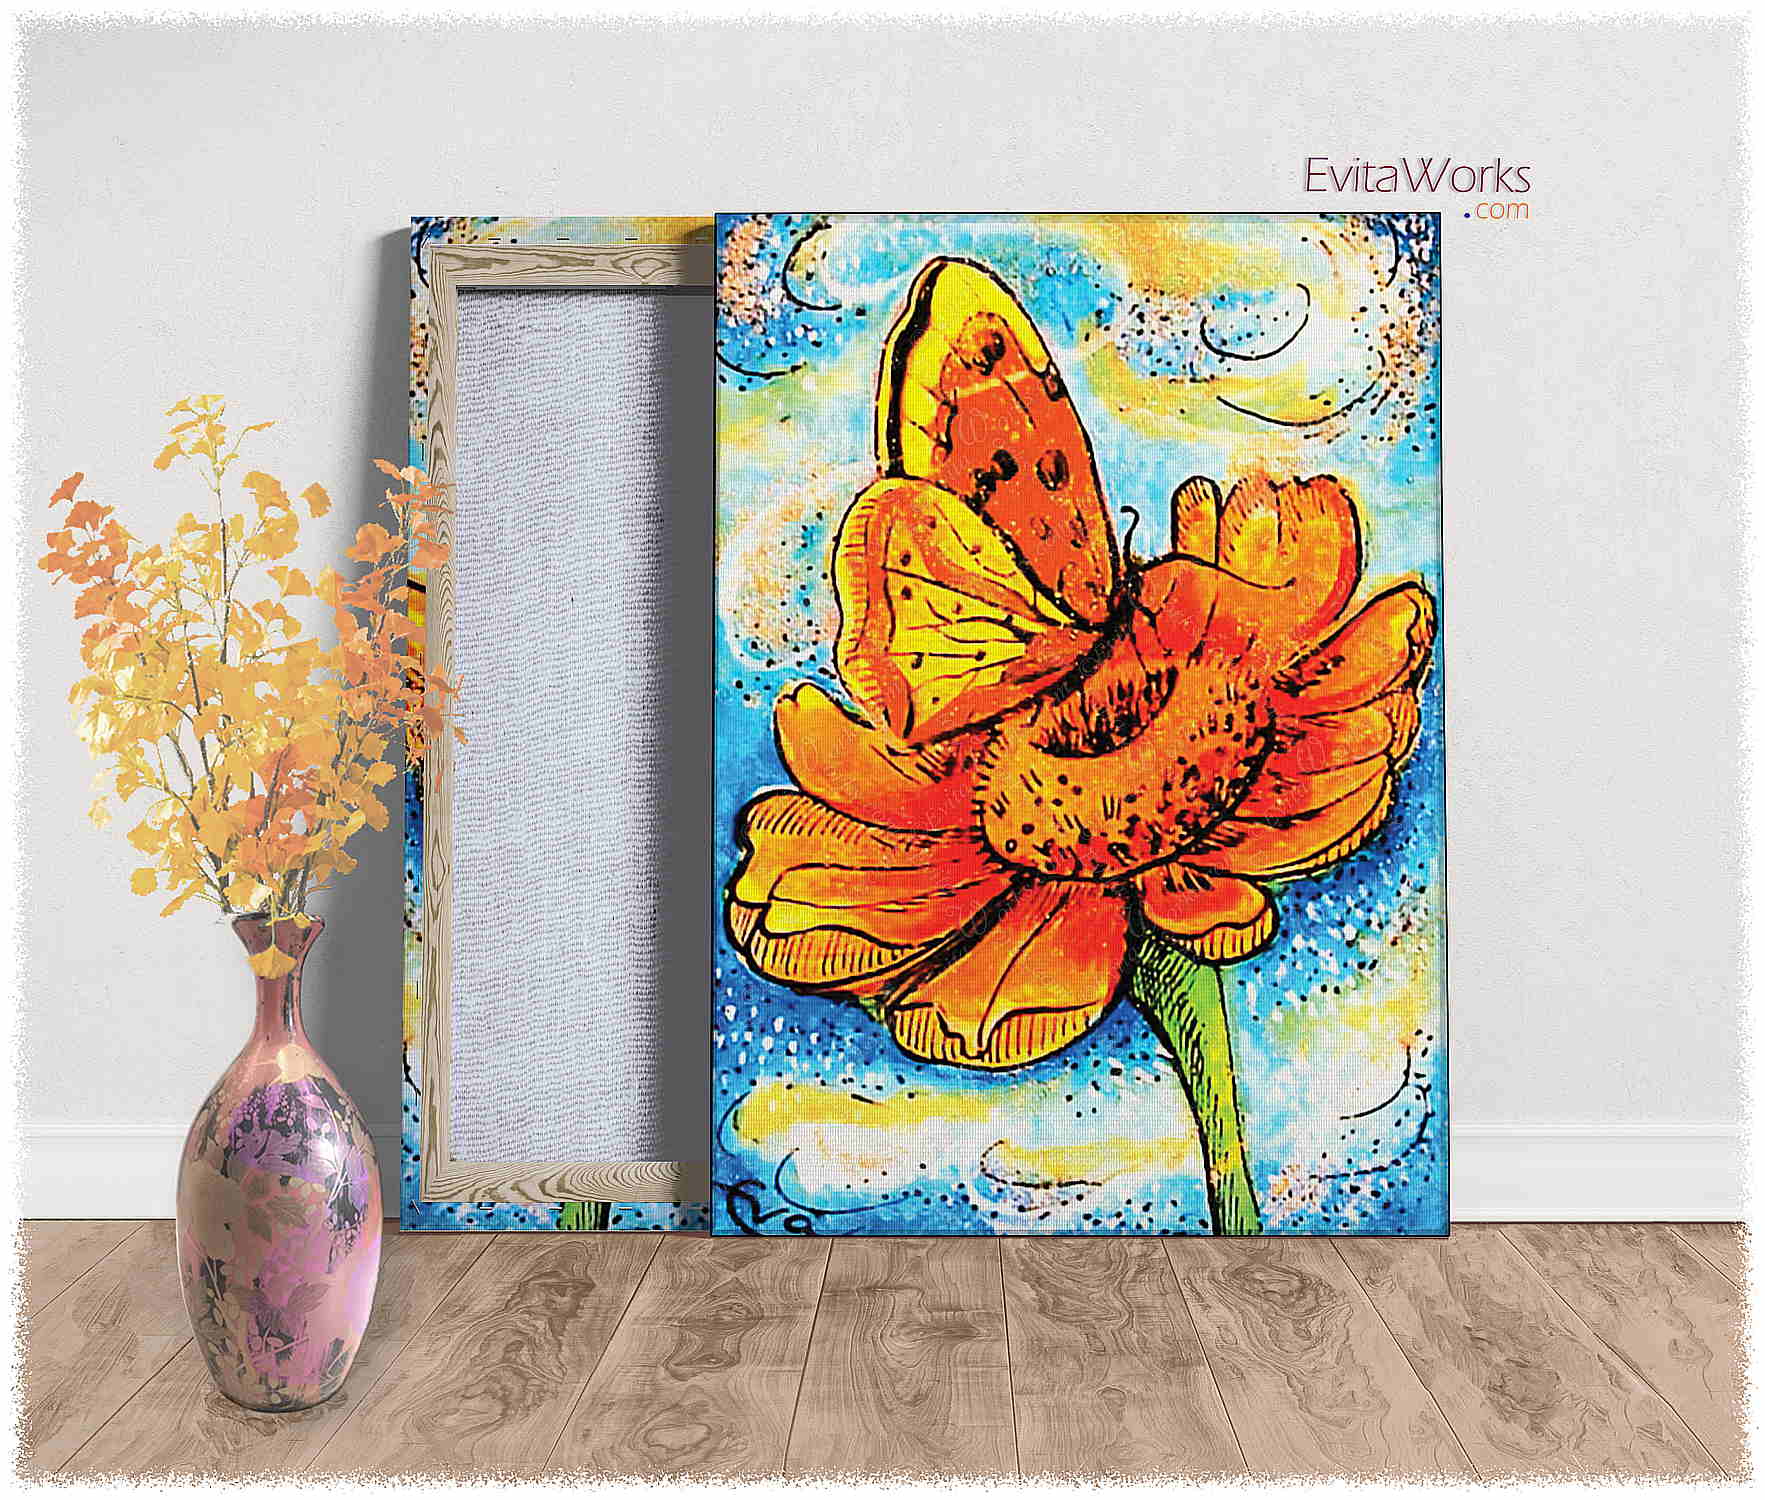 Hit to learn about "Butterfly illustration 99" on canvases